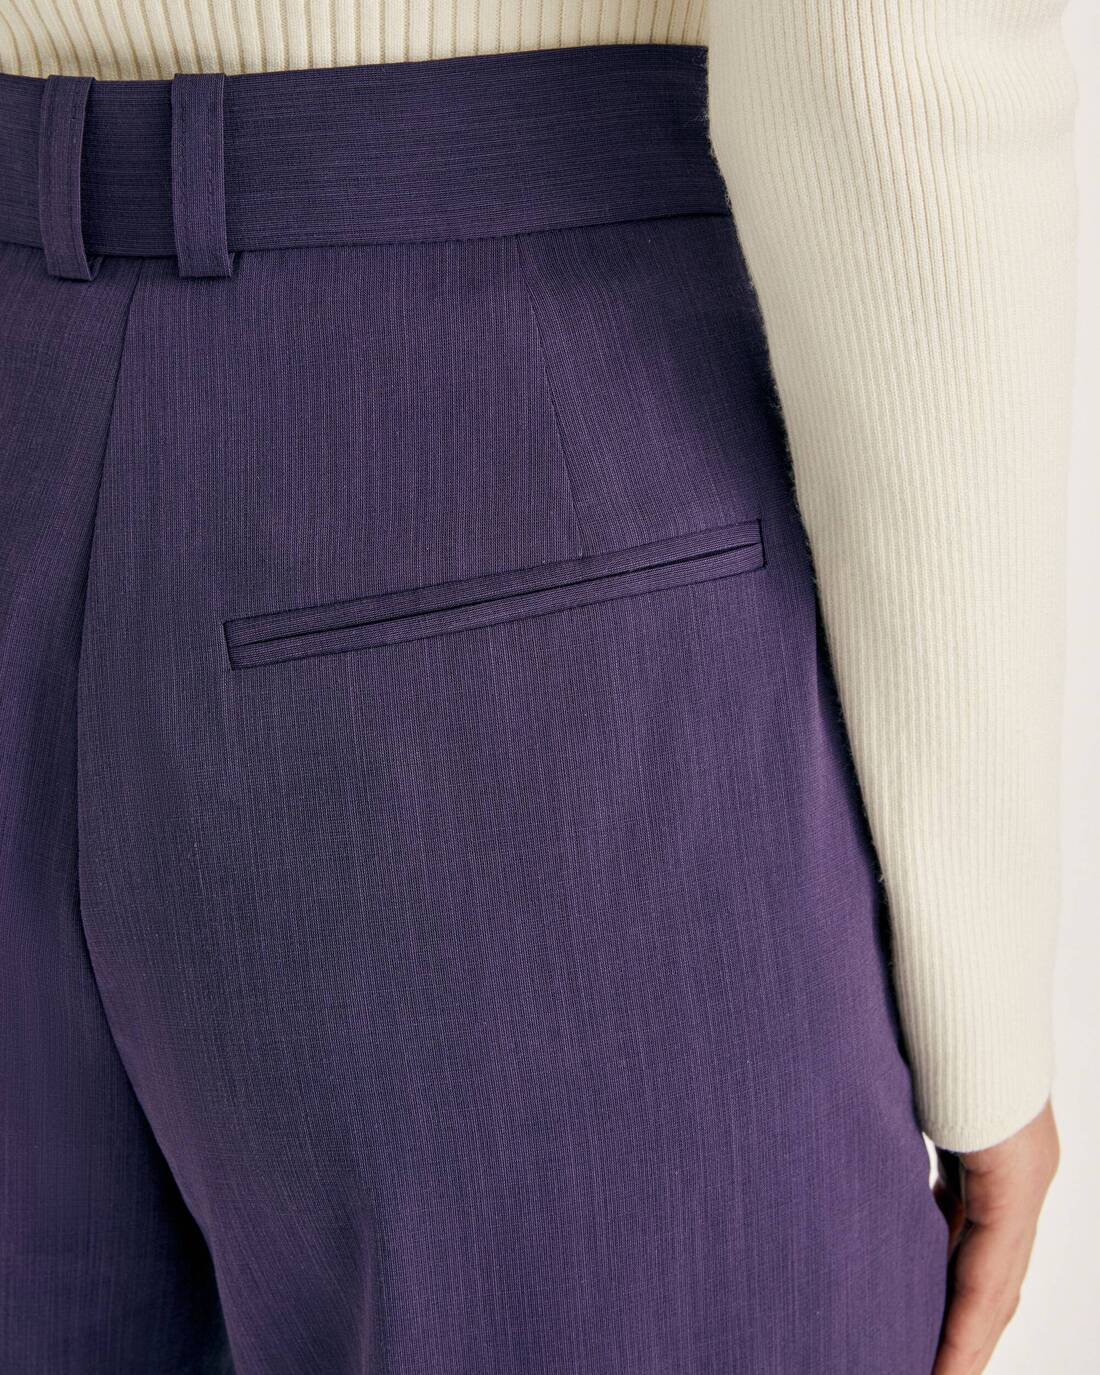 Palazzo trousers with tucks